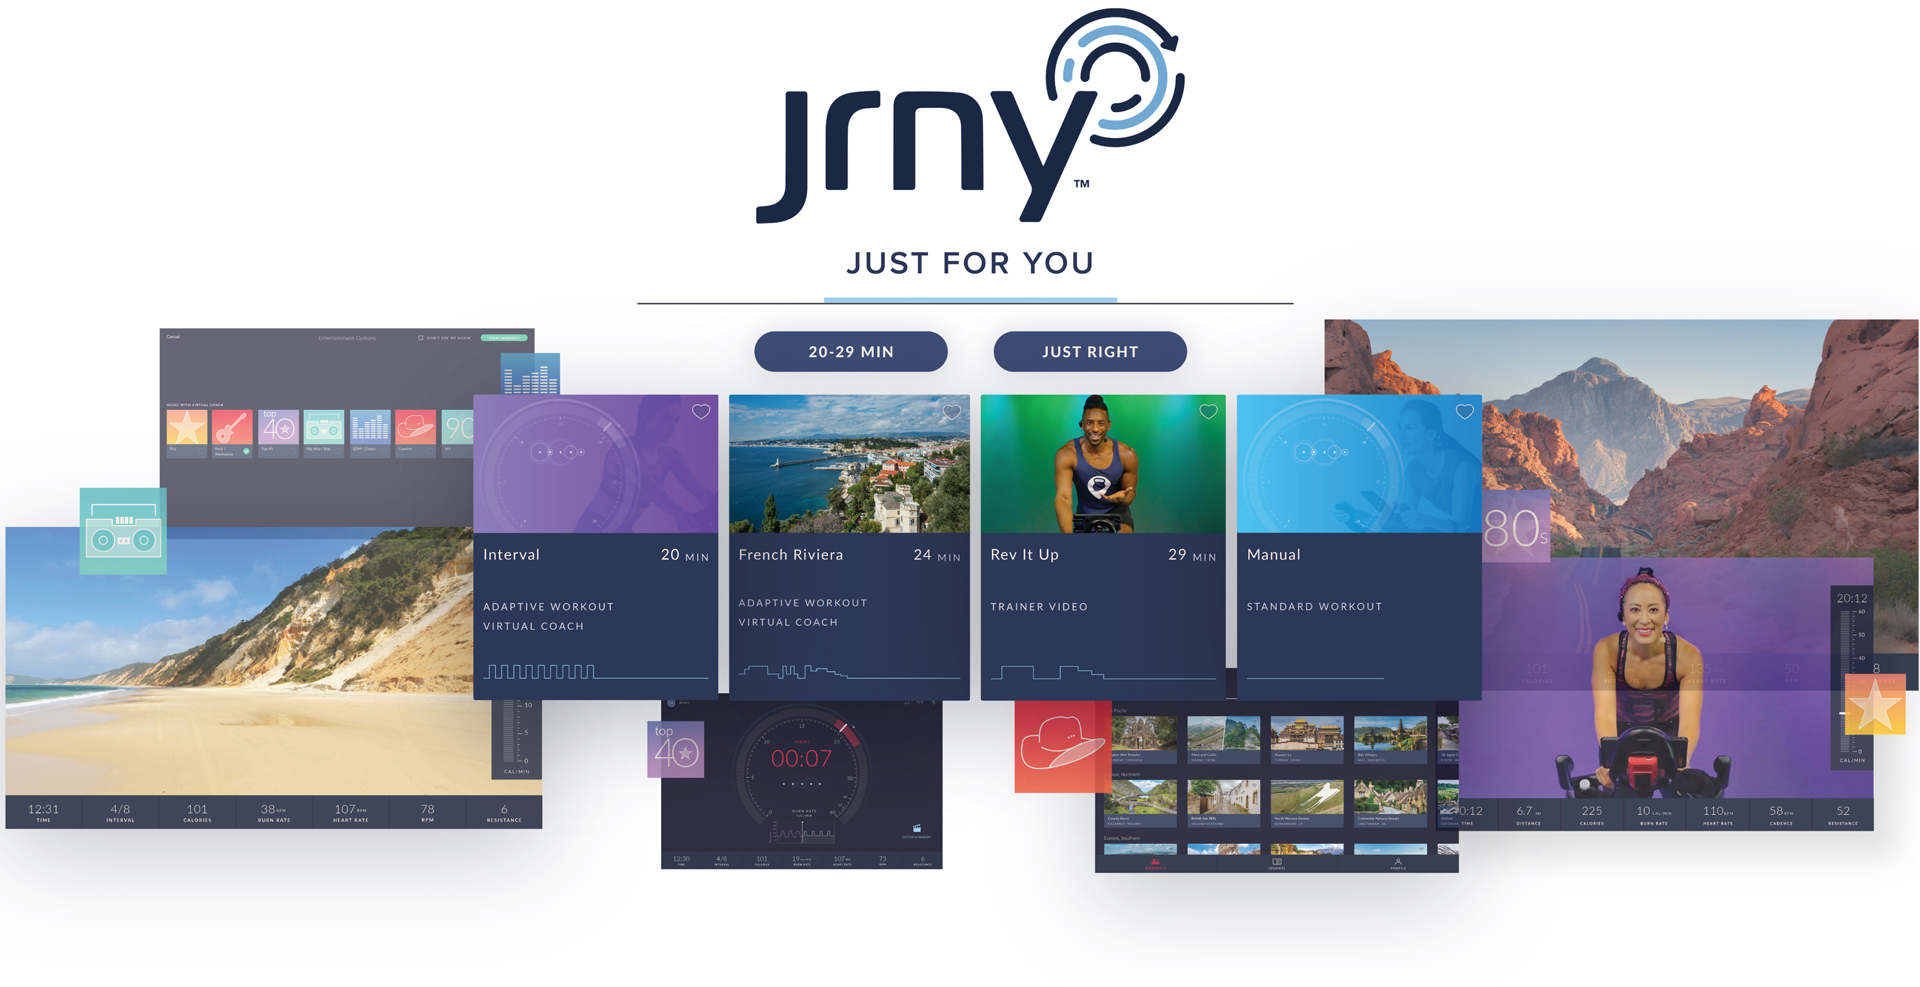 JRNY App - digital assets and screenshots of the JRNY experience